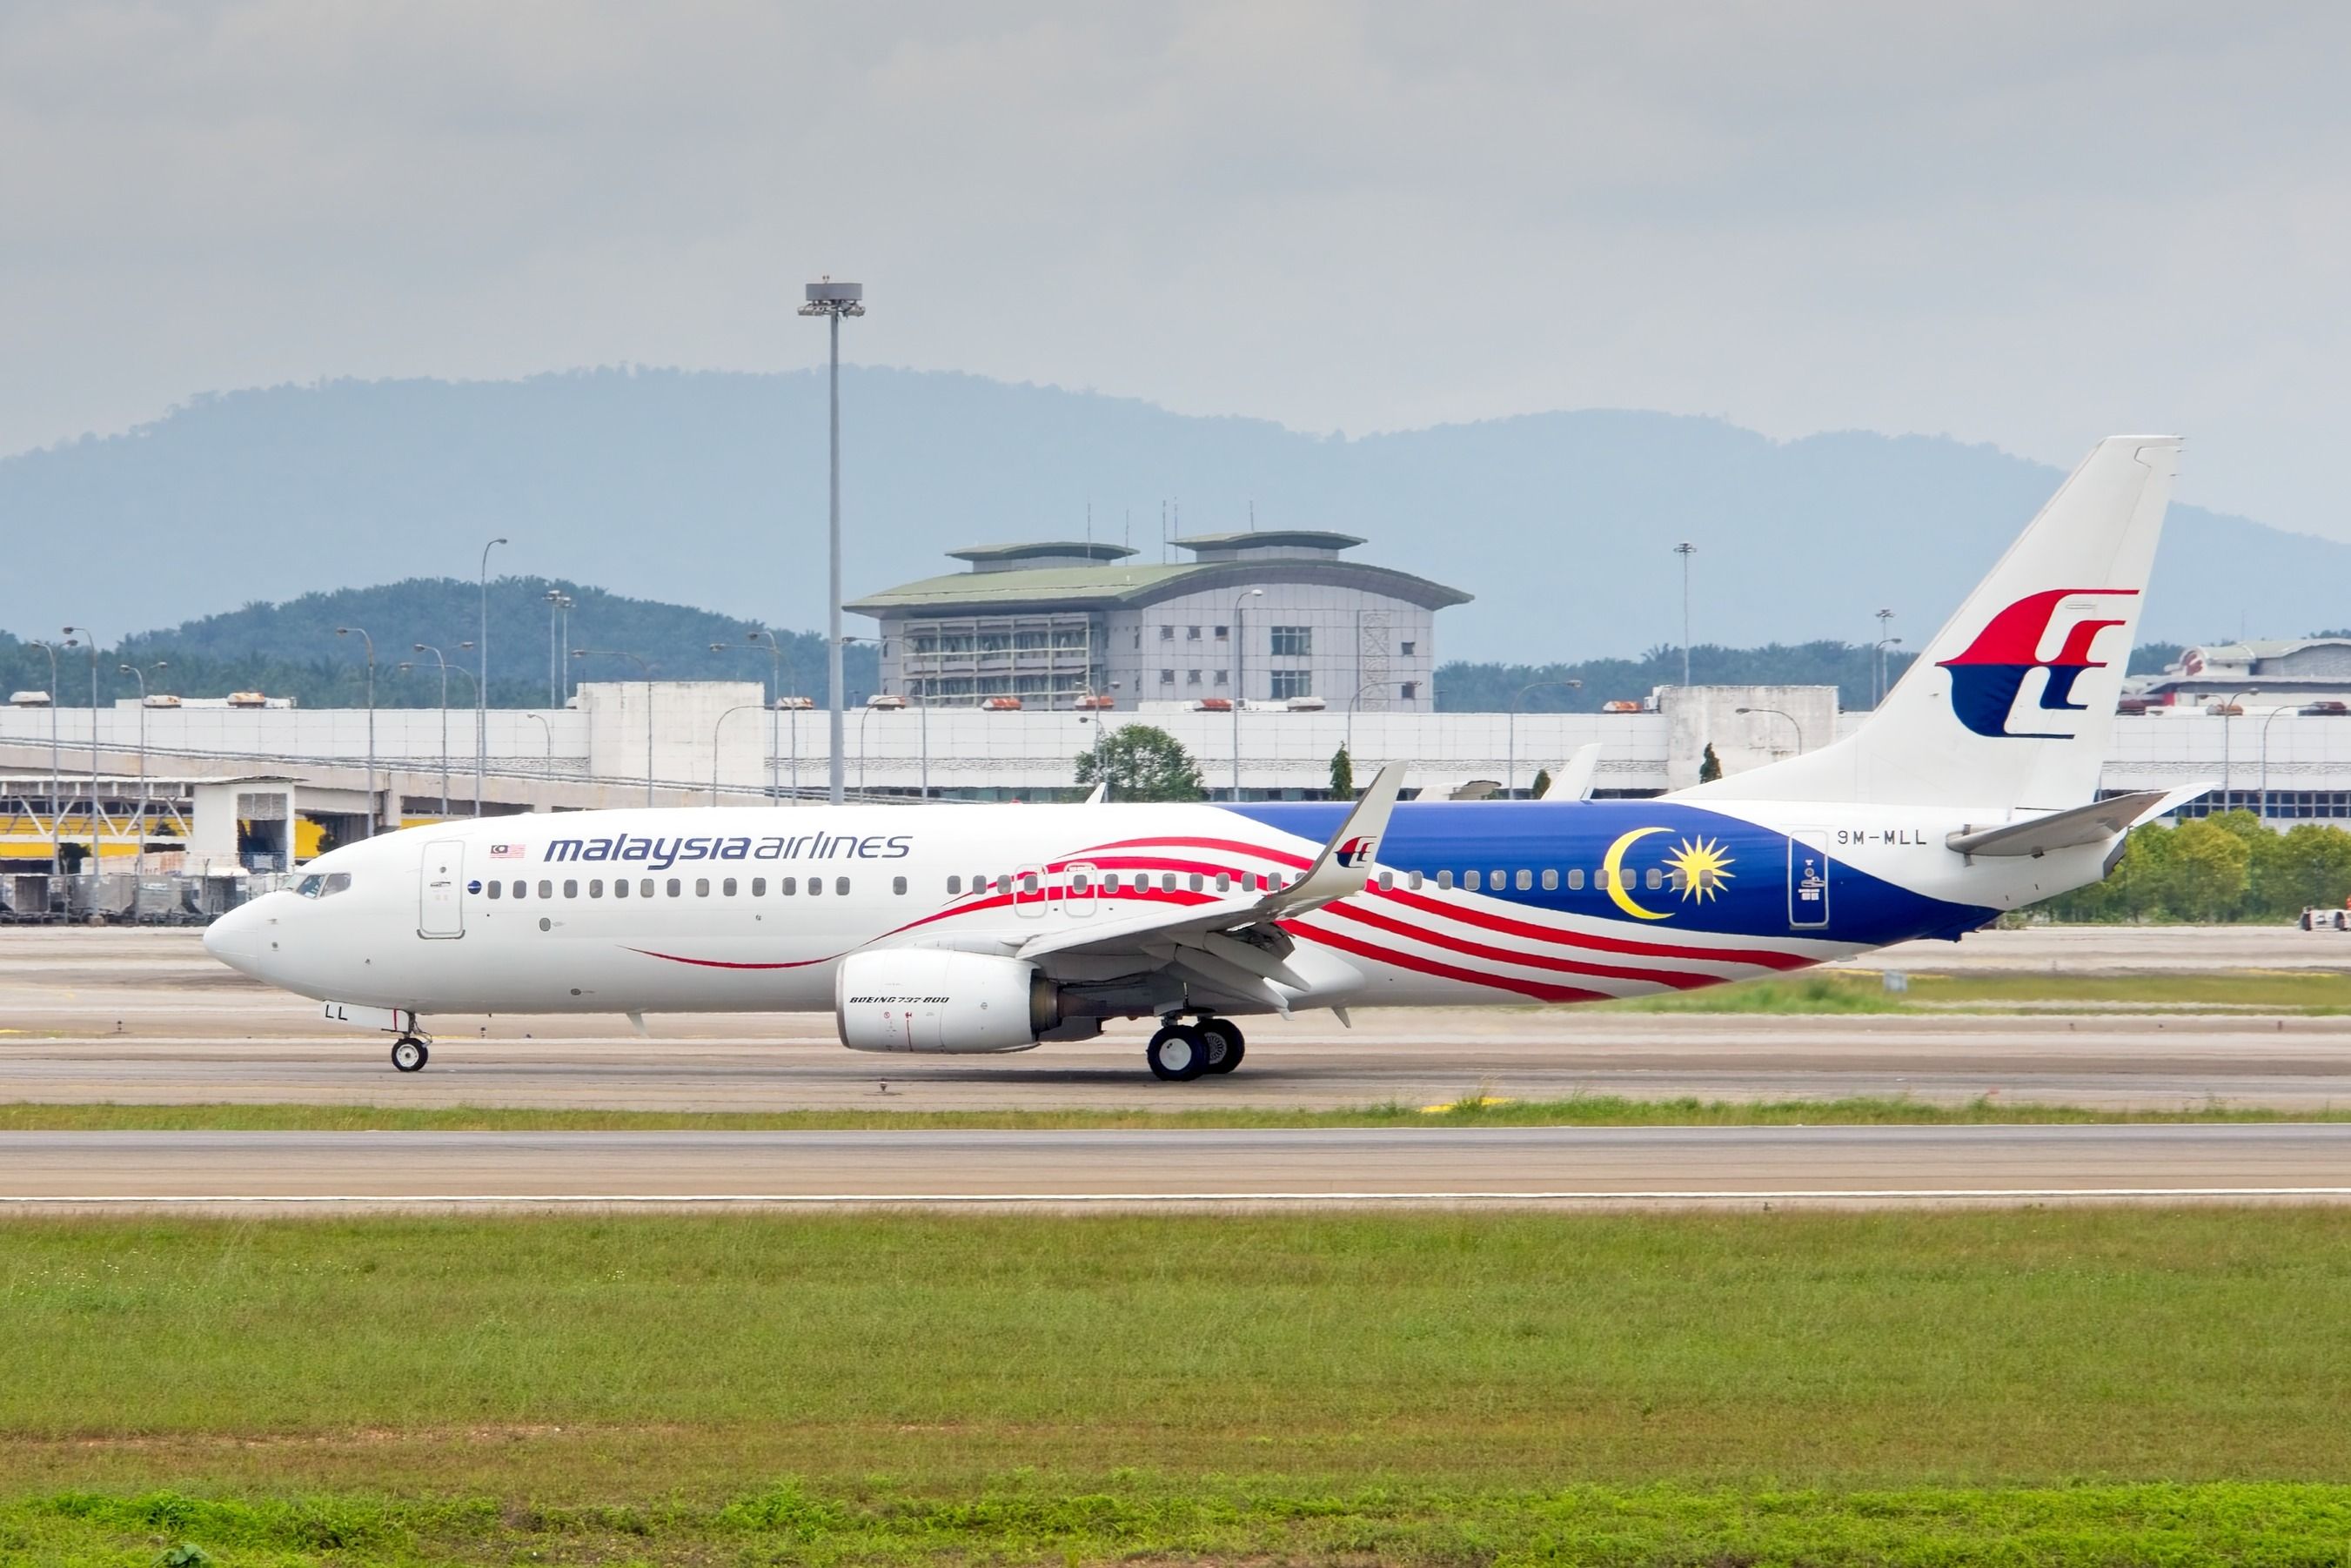 Malaysia Airlines Boeing 737-800 taxiing